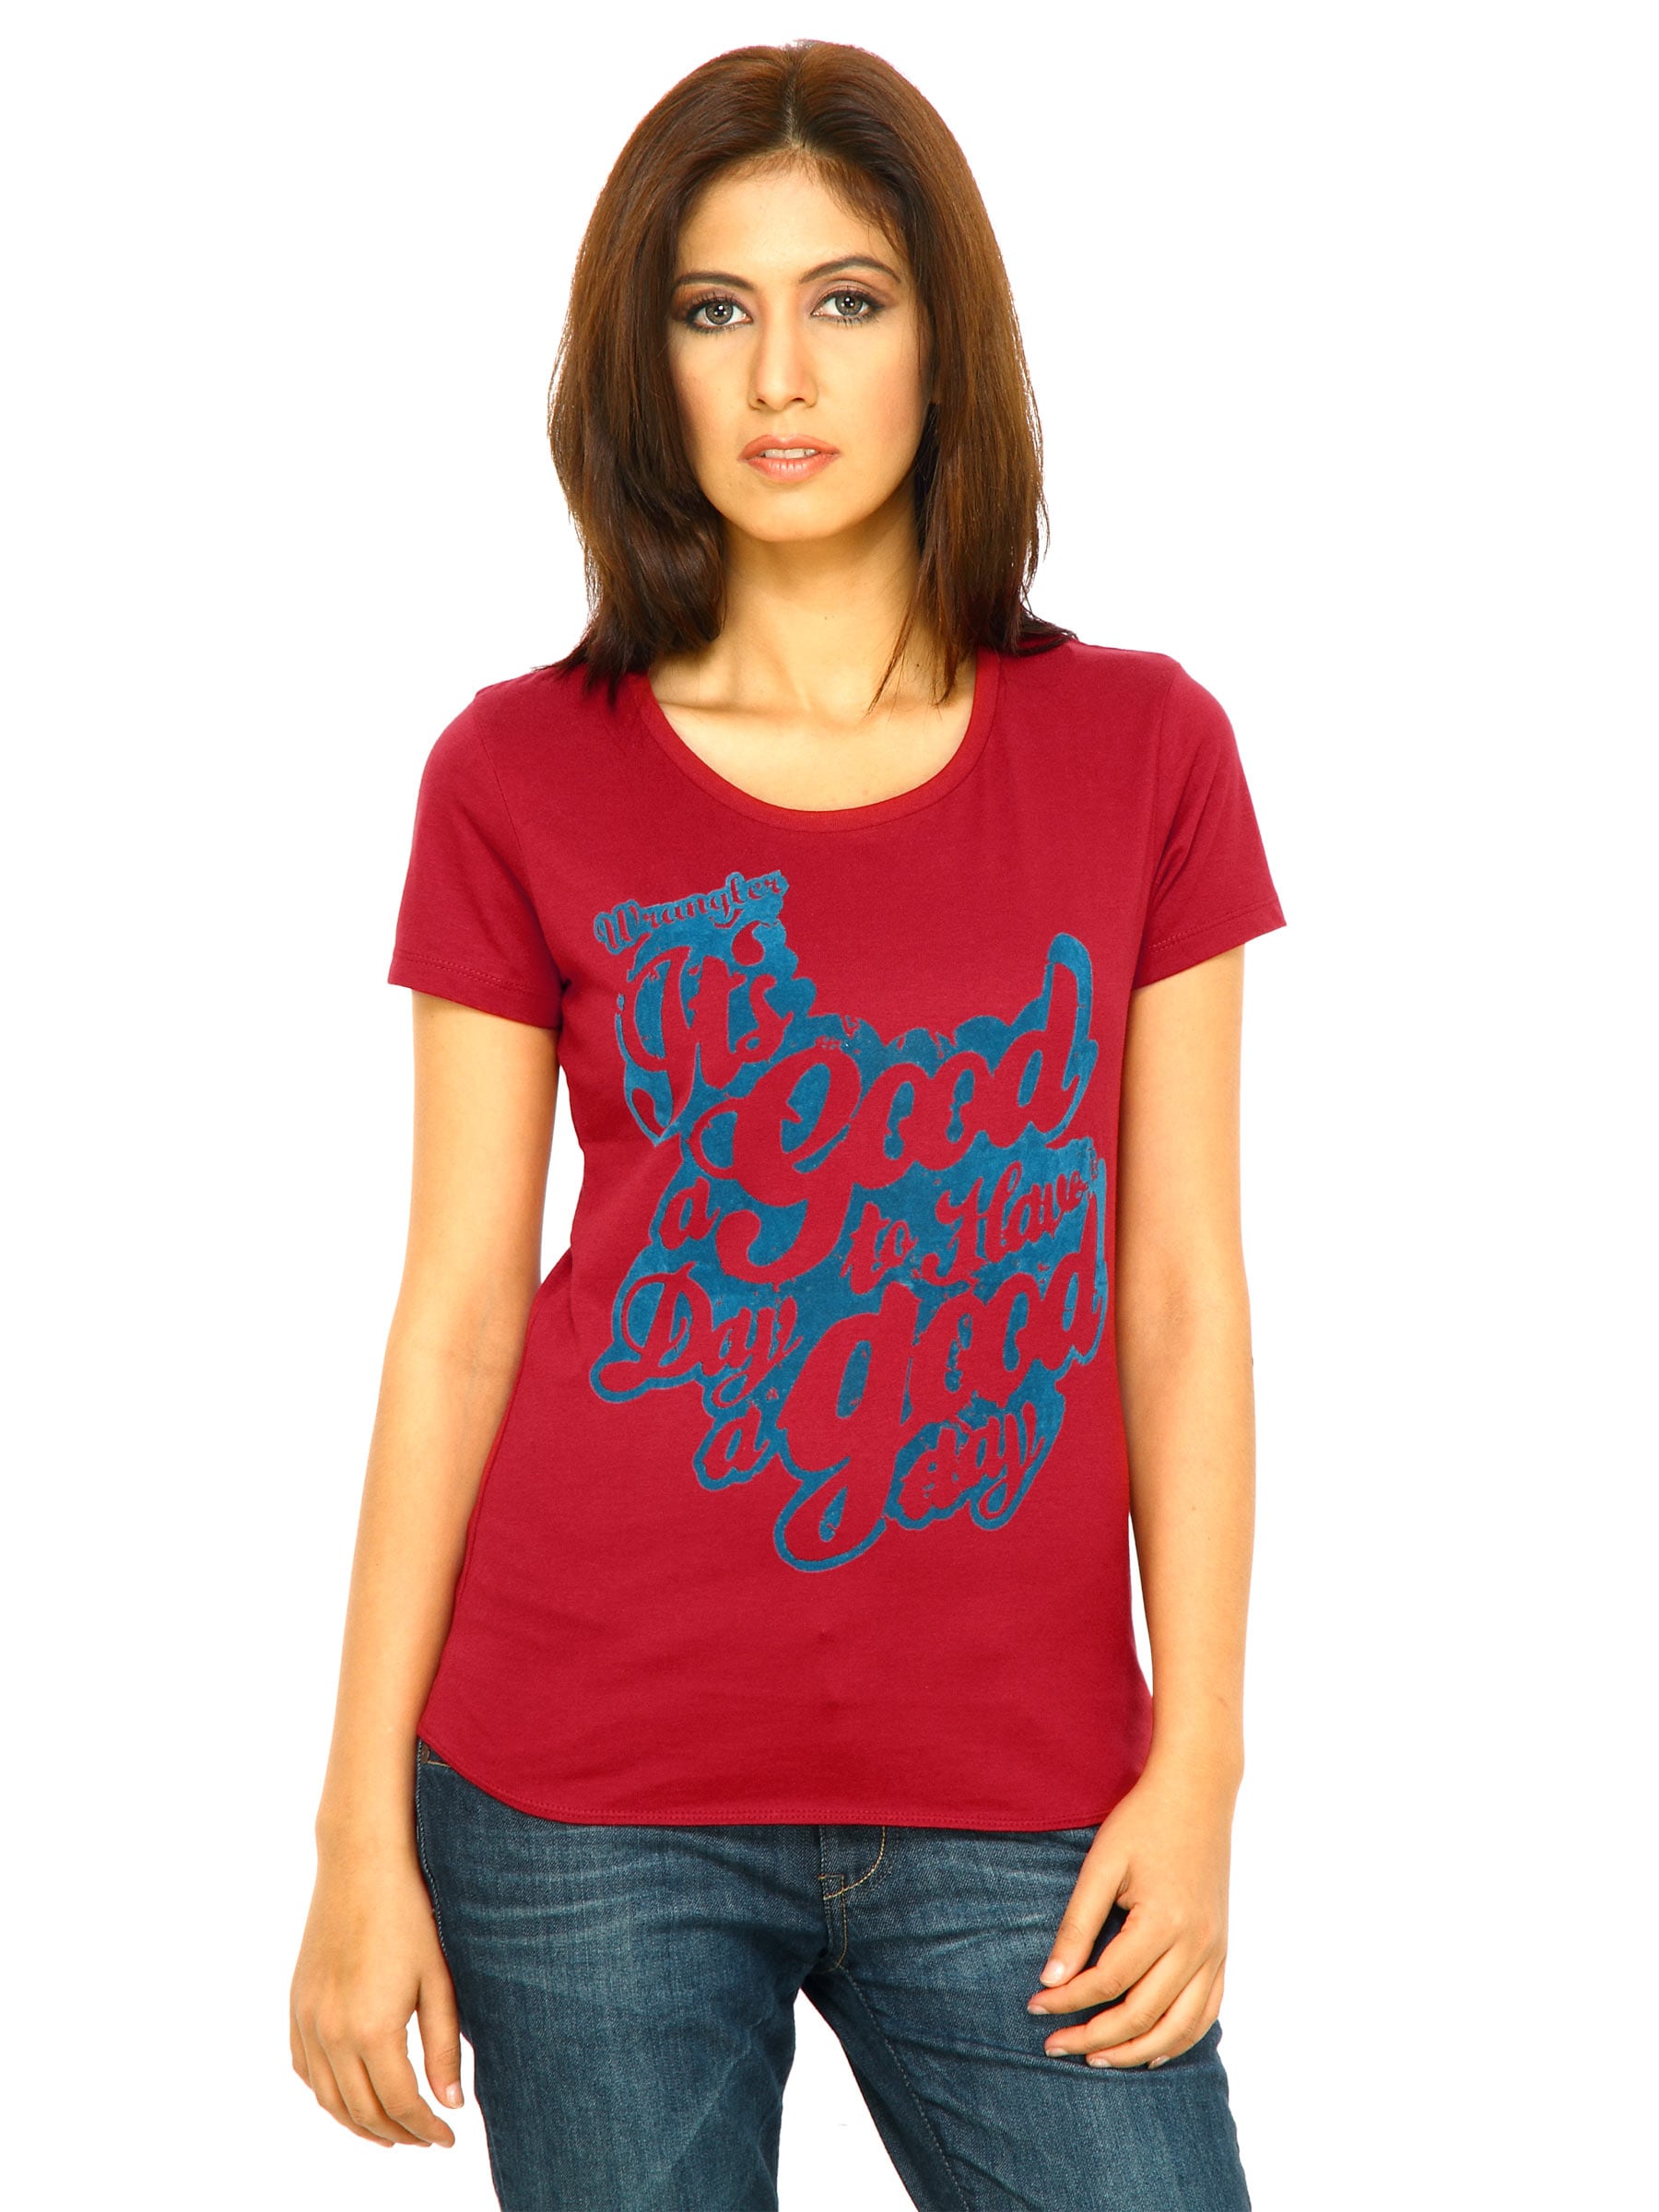 Wrangler Women Its A Good Day Red T-Shirts